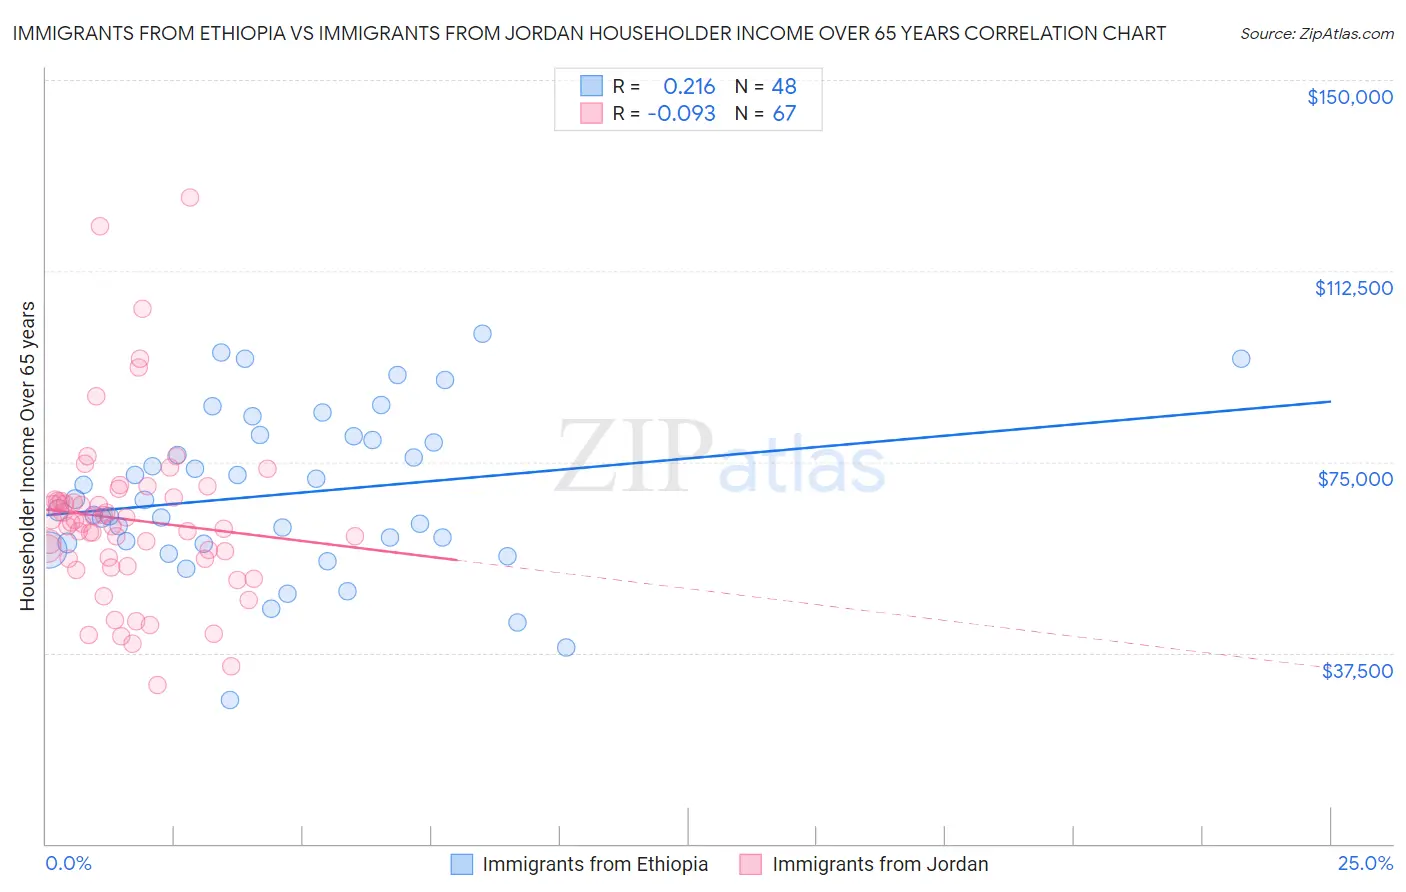 Immigrants from Ethiopia vs Immigrants from Jordan Householder Income Over 65 years